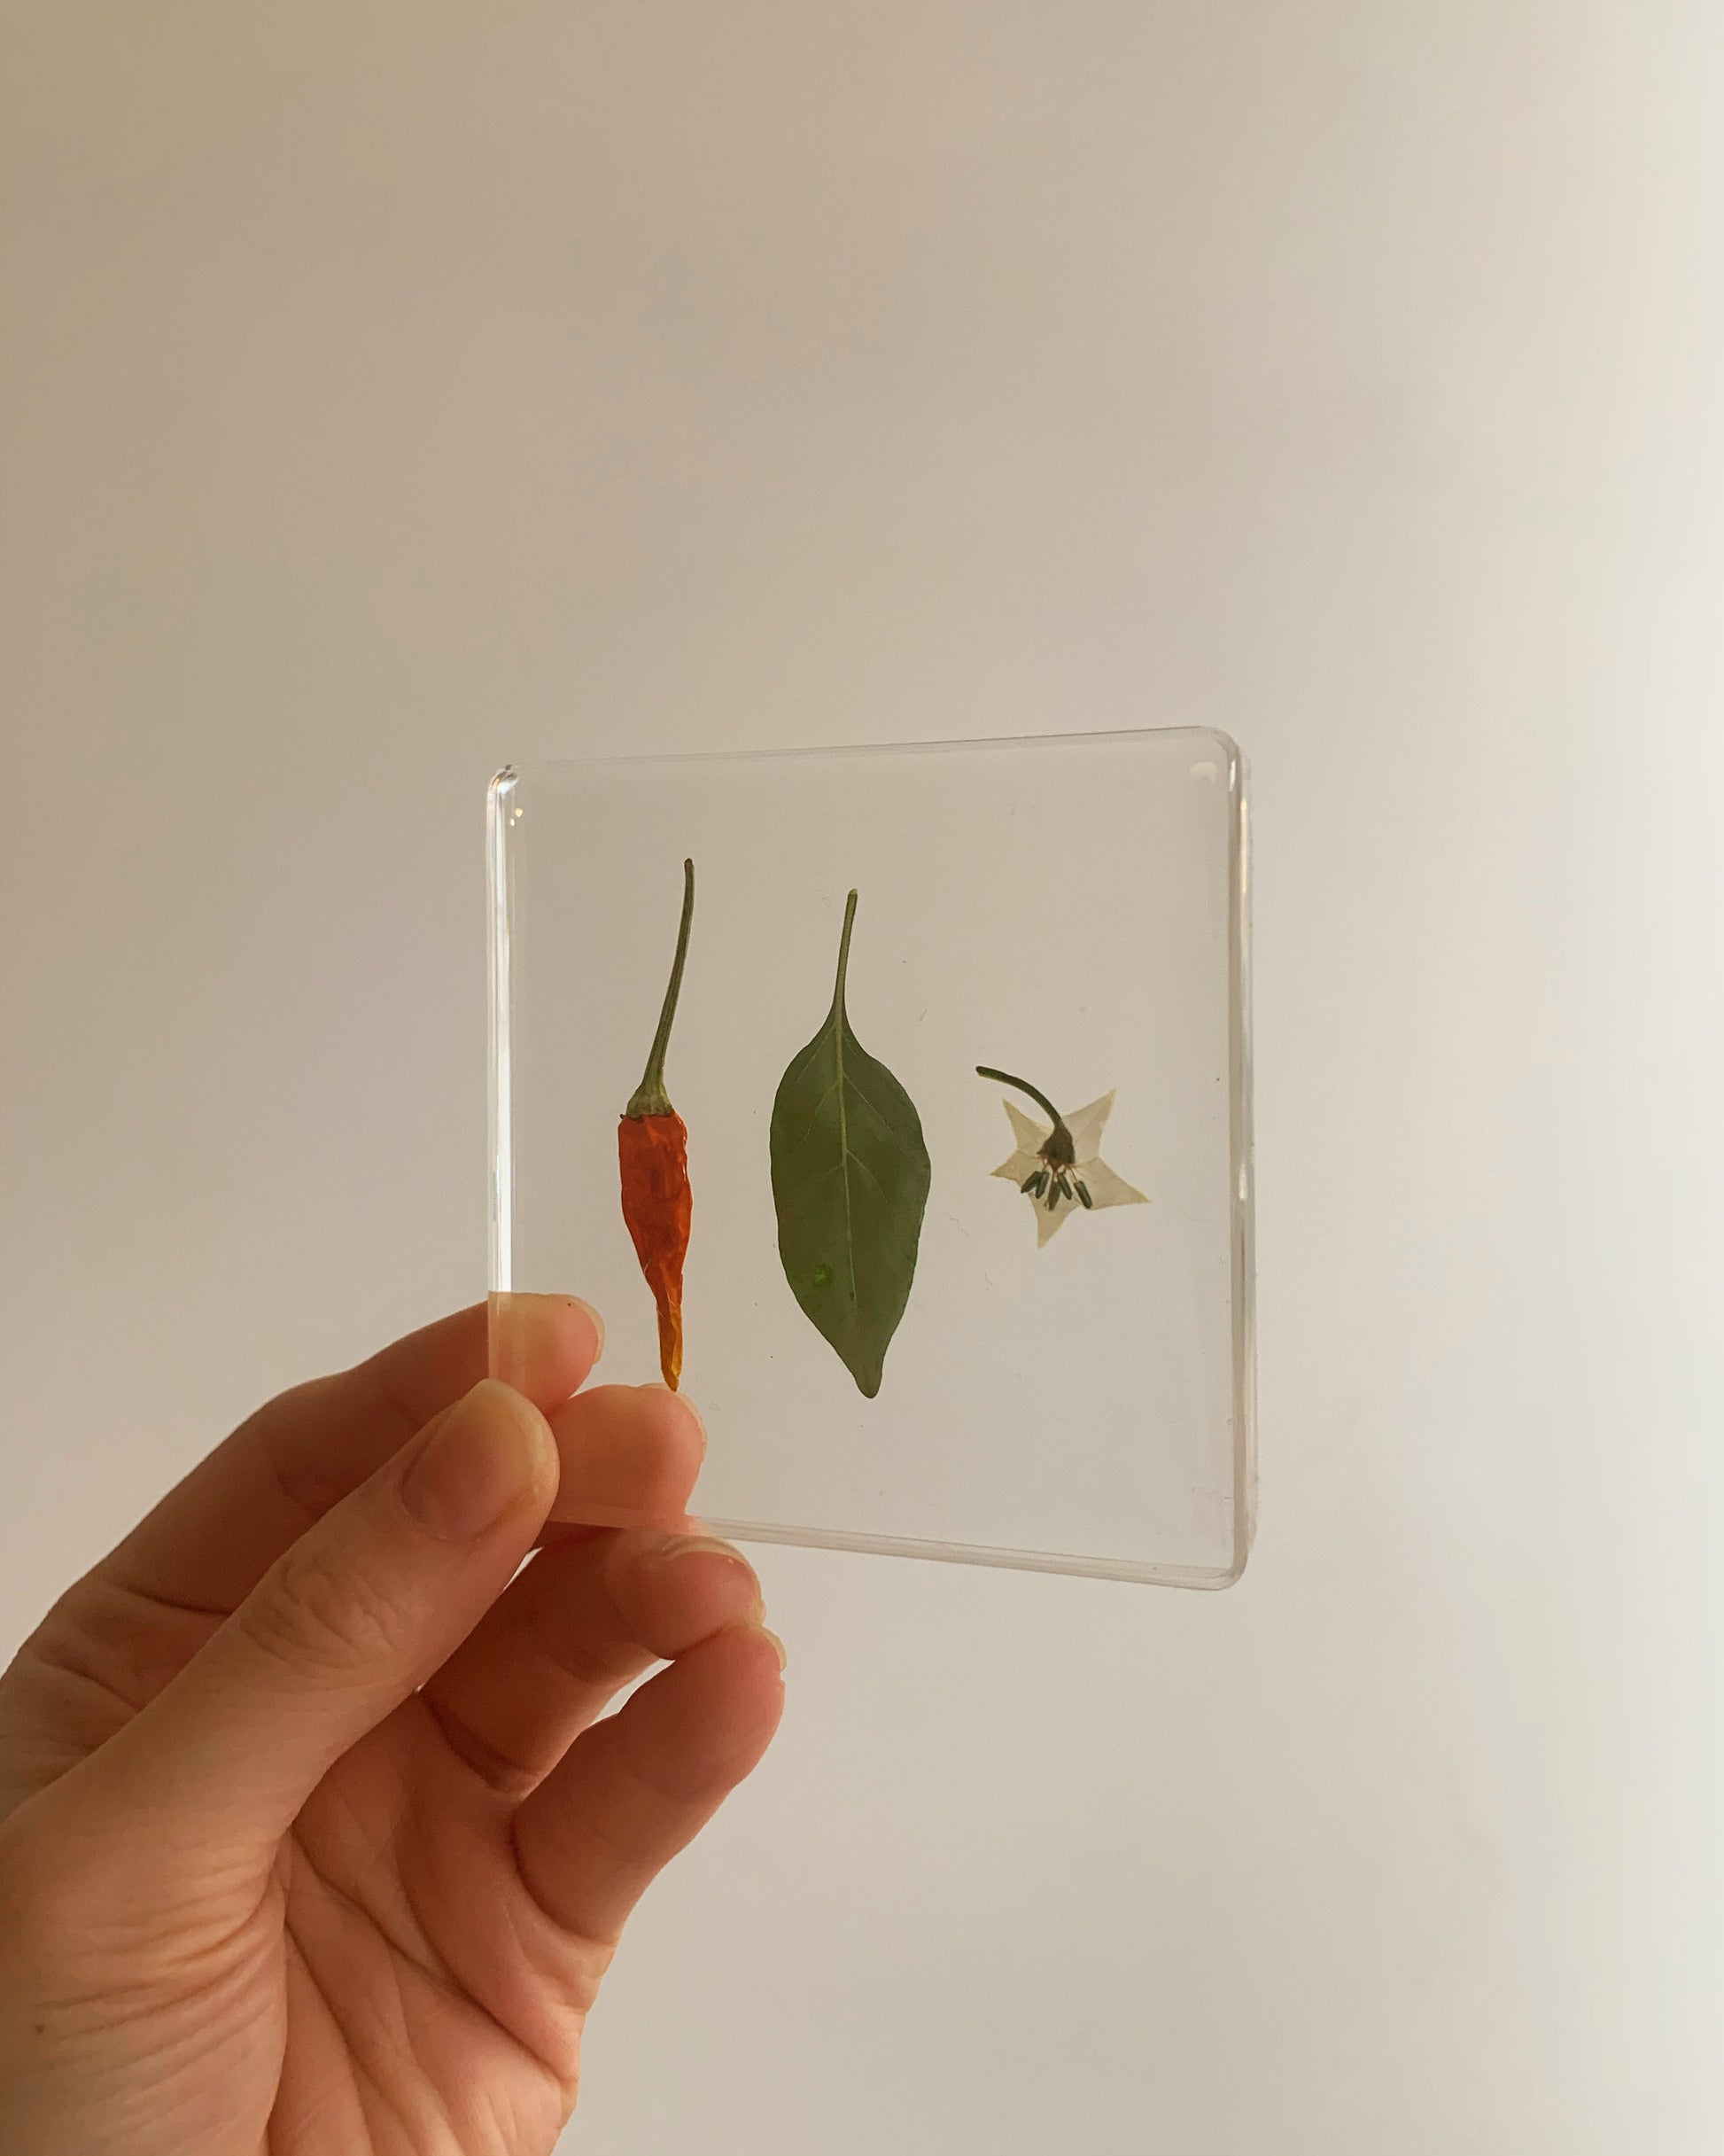 The life cycle of a pepper displayed in a square resin coaster.